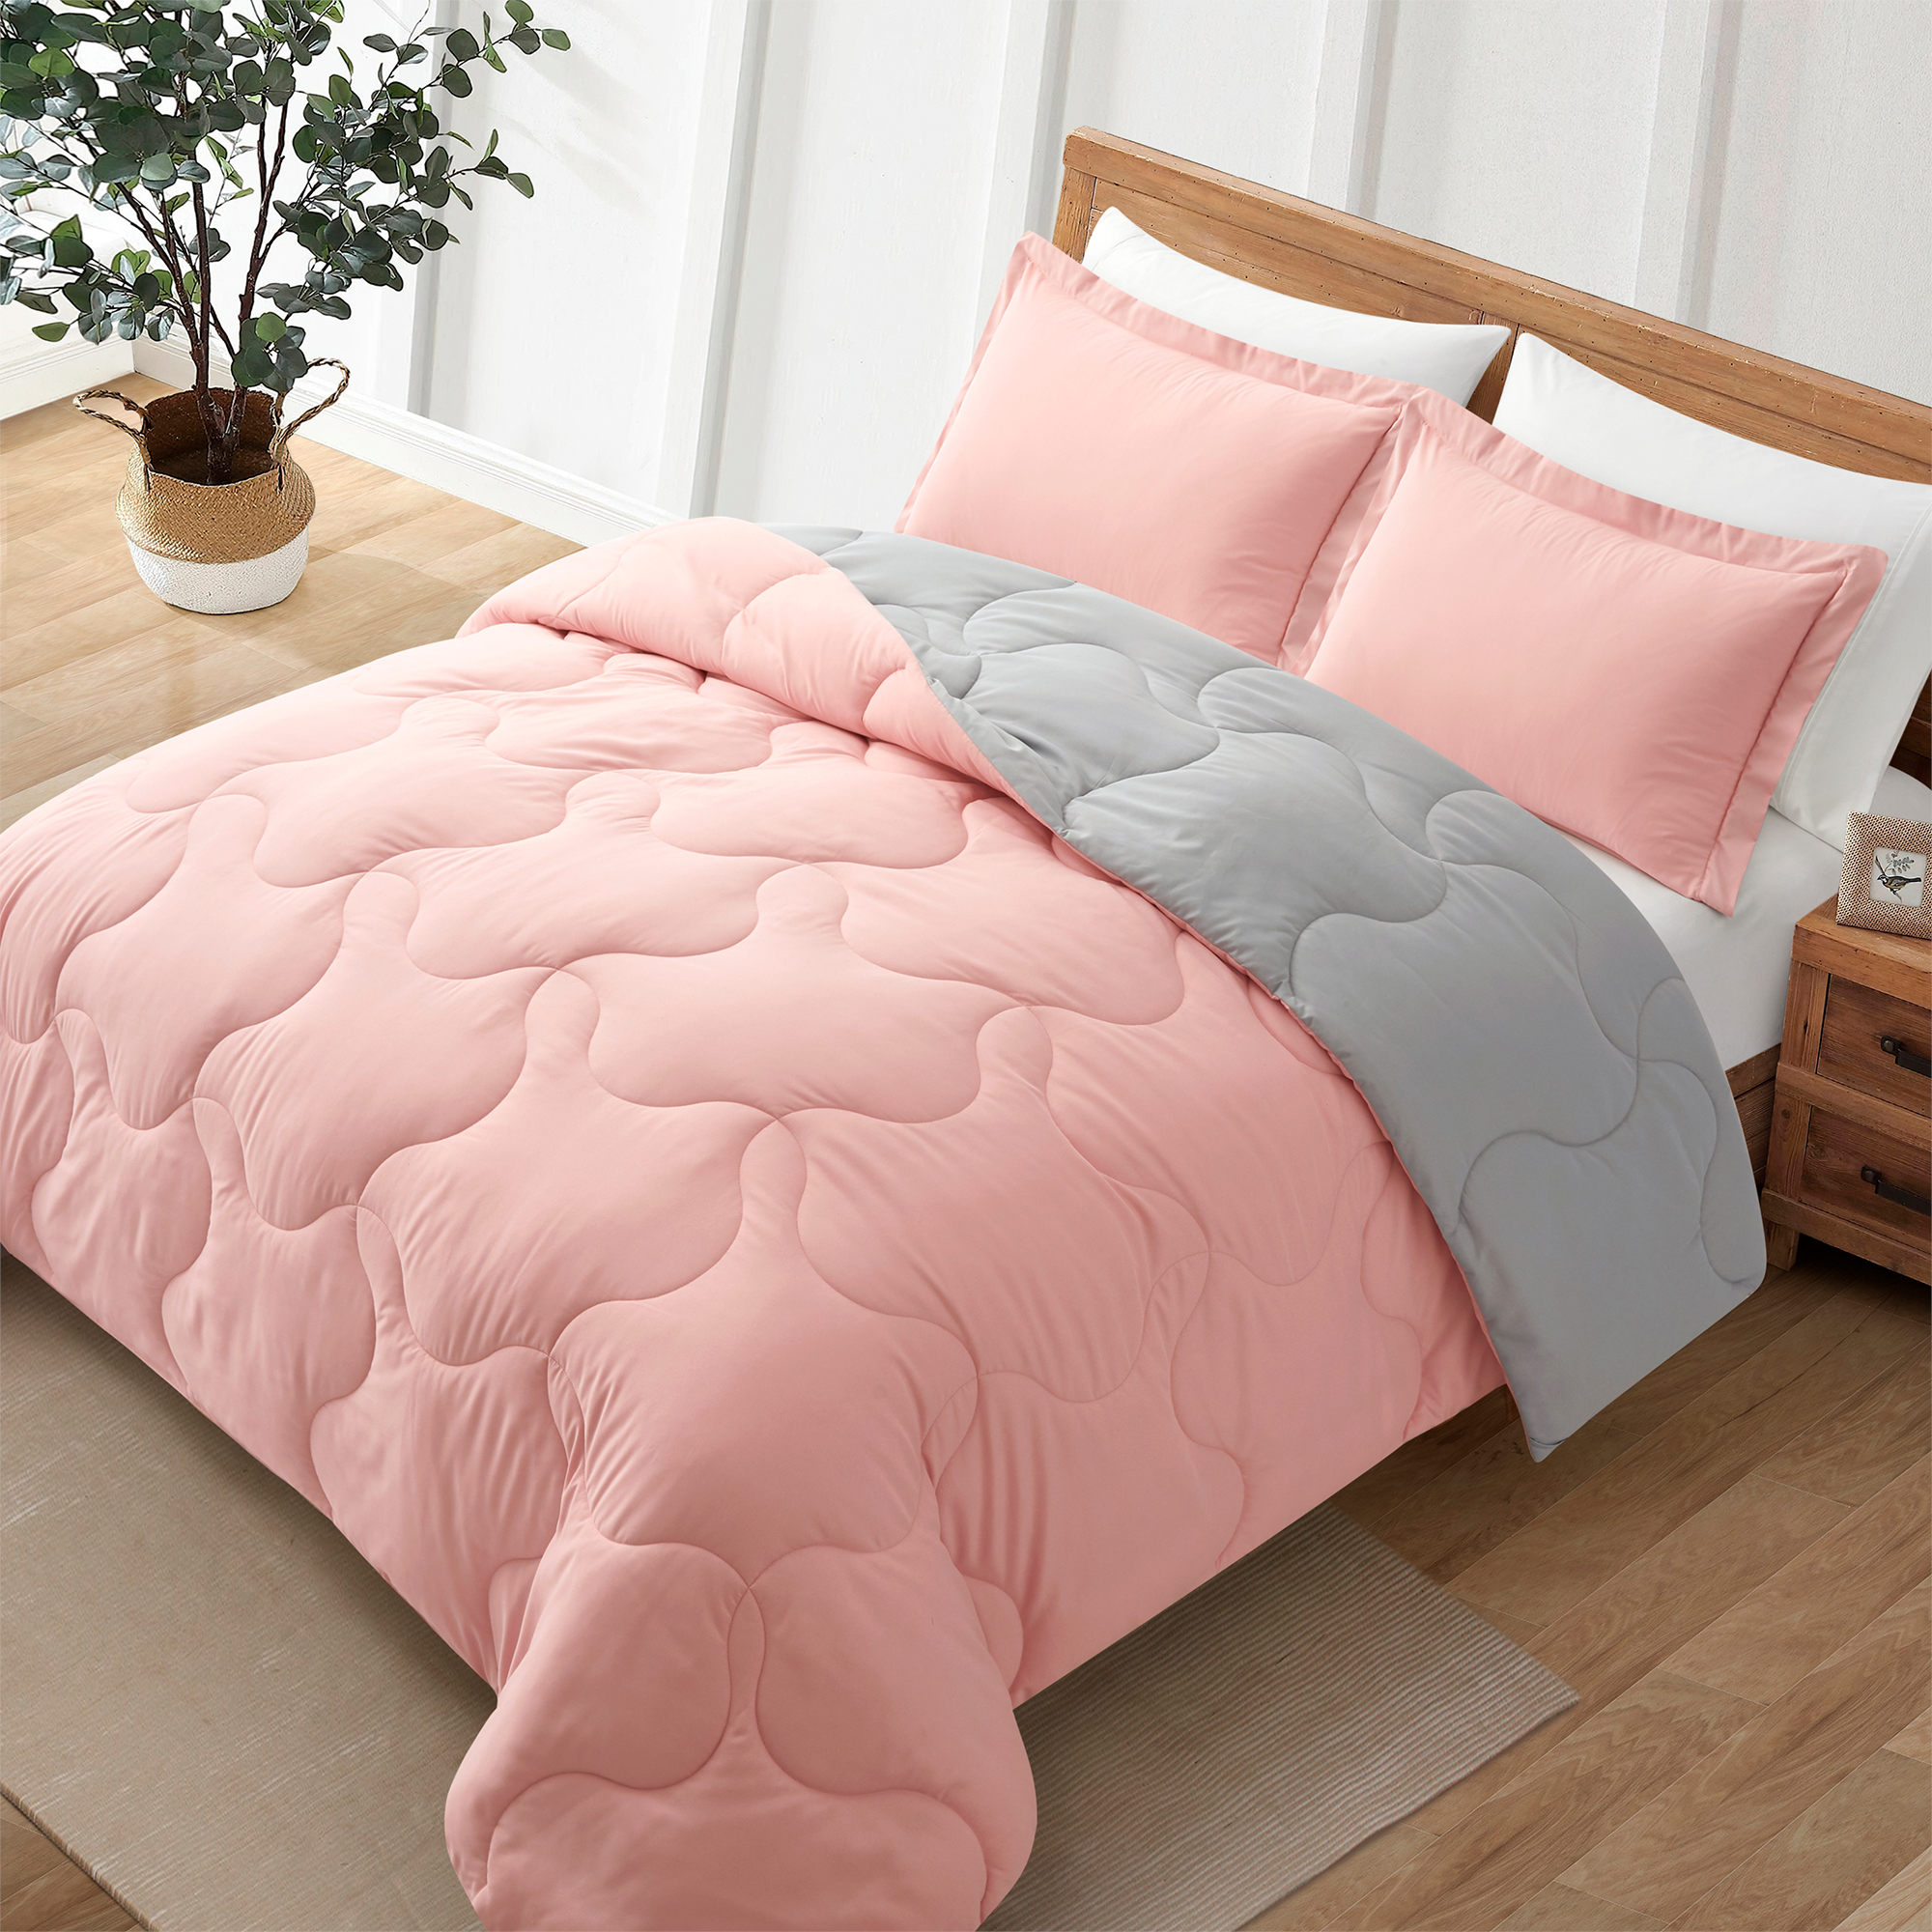 3 Or 2 Pieces Lightweight Reversible Comforter Set With Pillow Shams - Pink/Grey, Twin